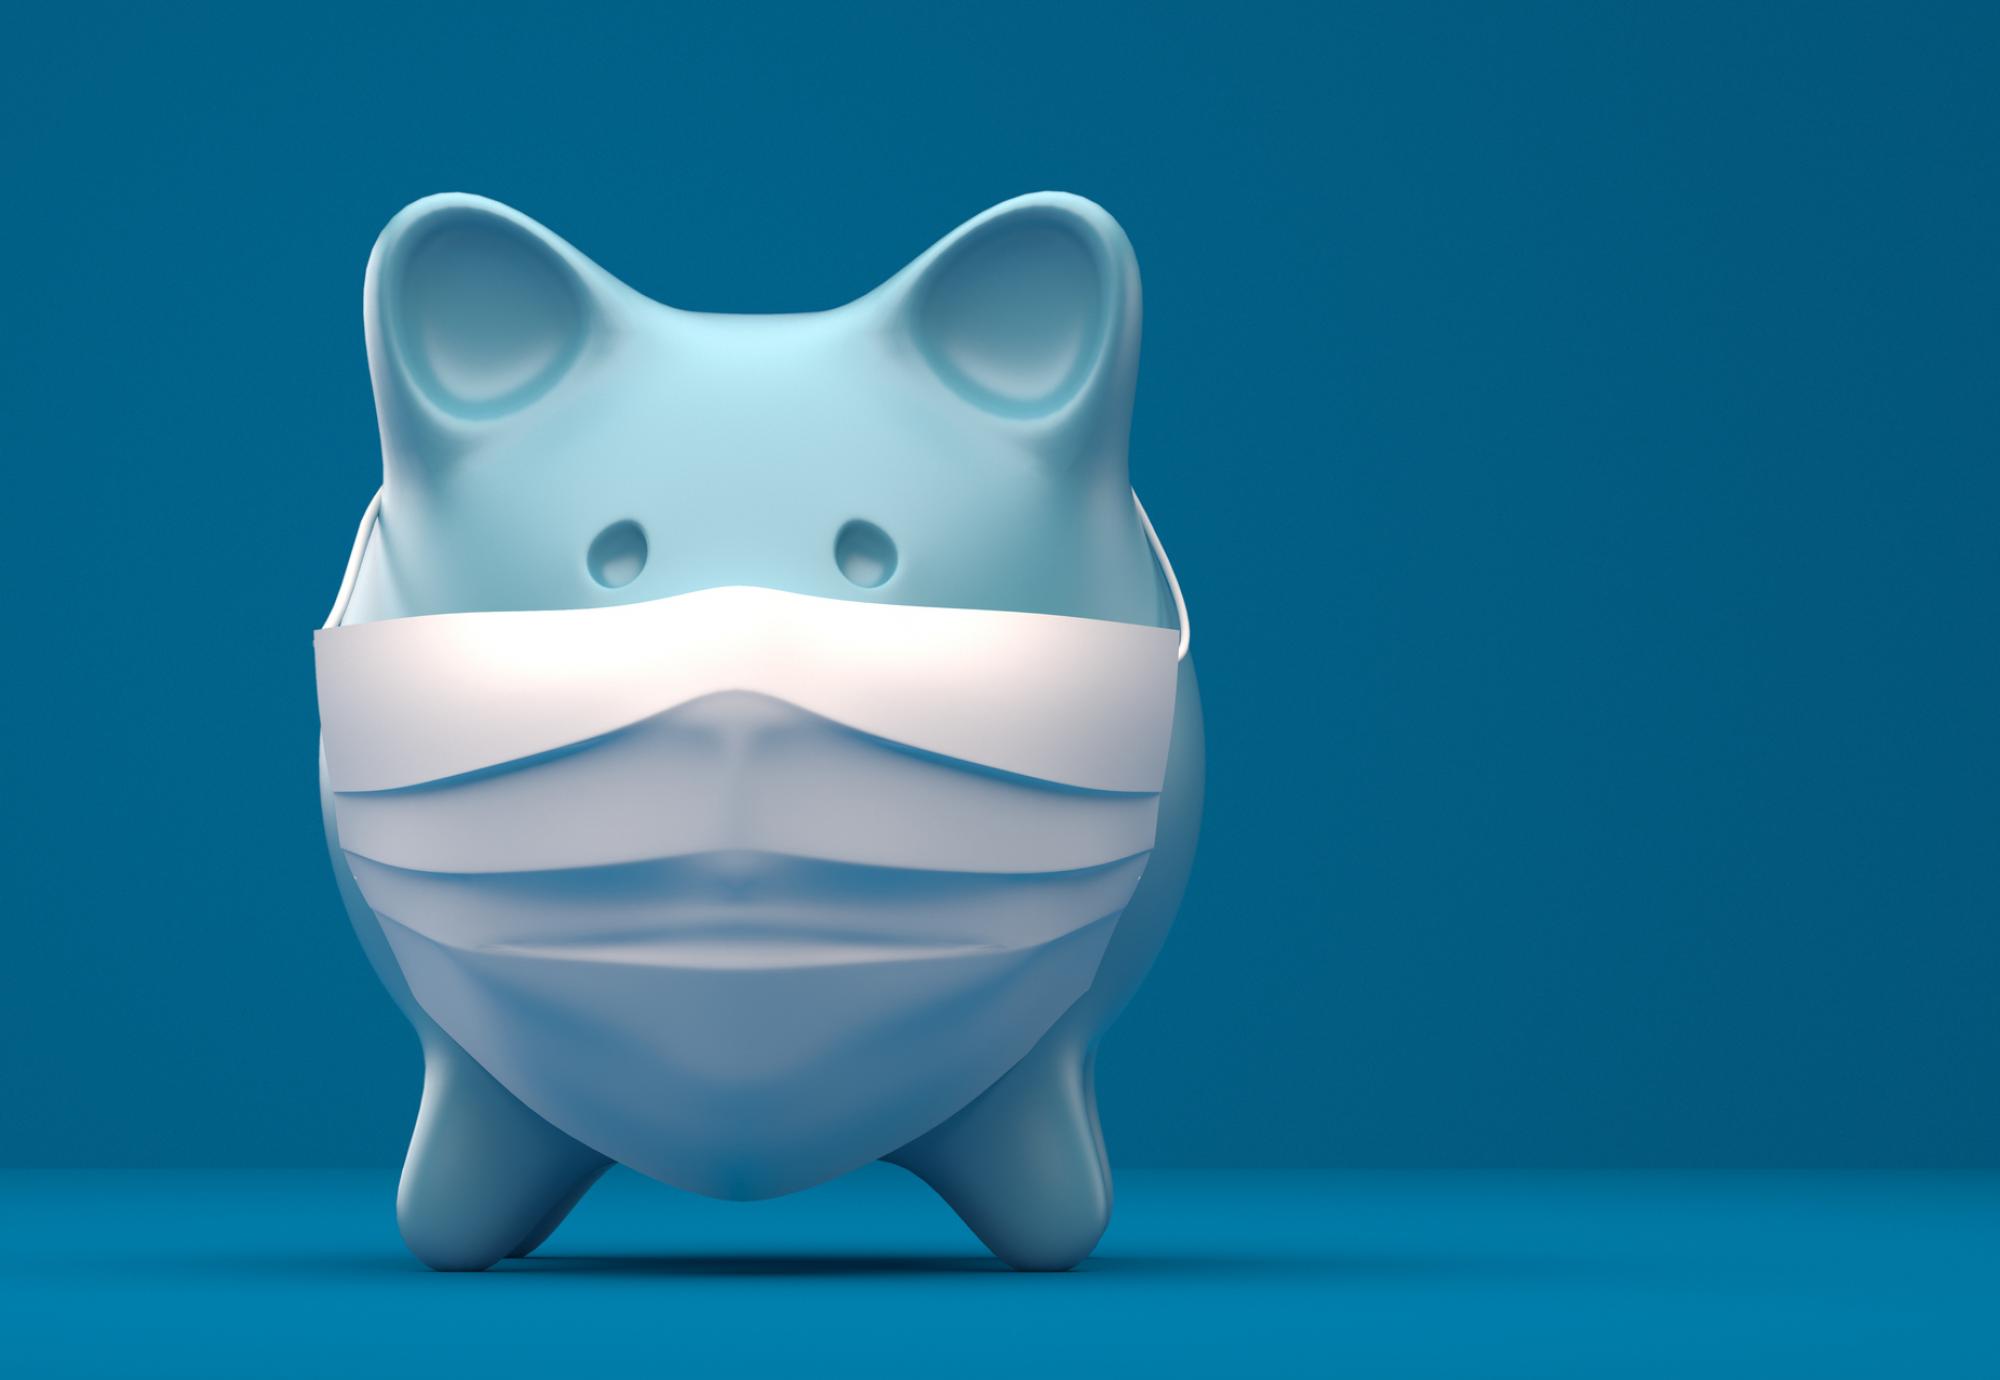 Piggy bank wearing a surgical mask.